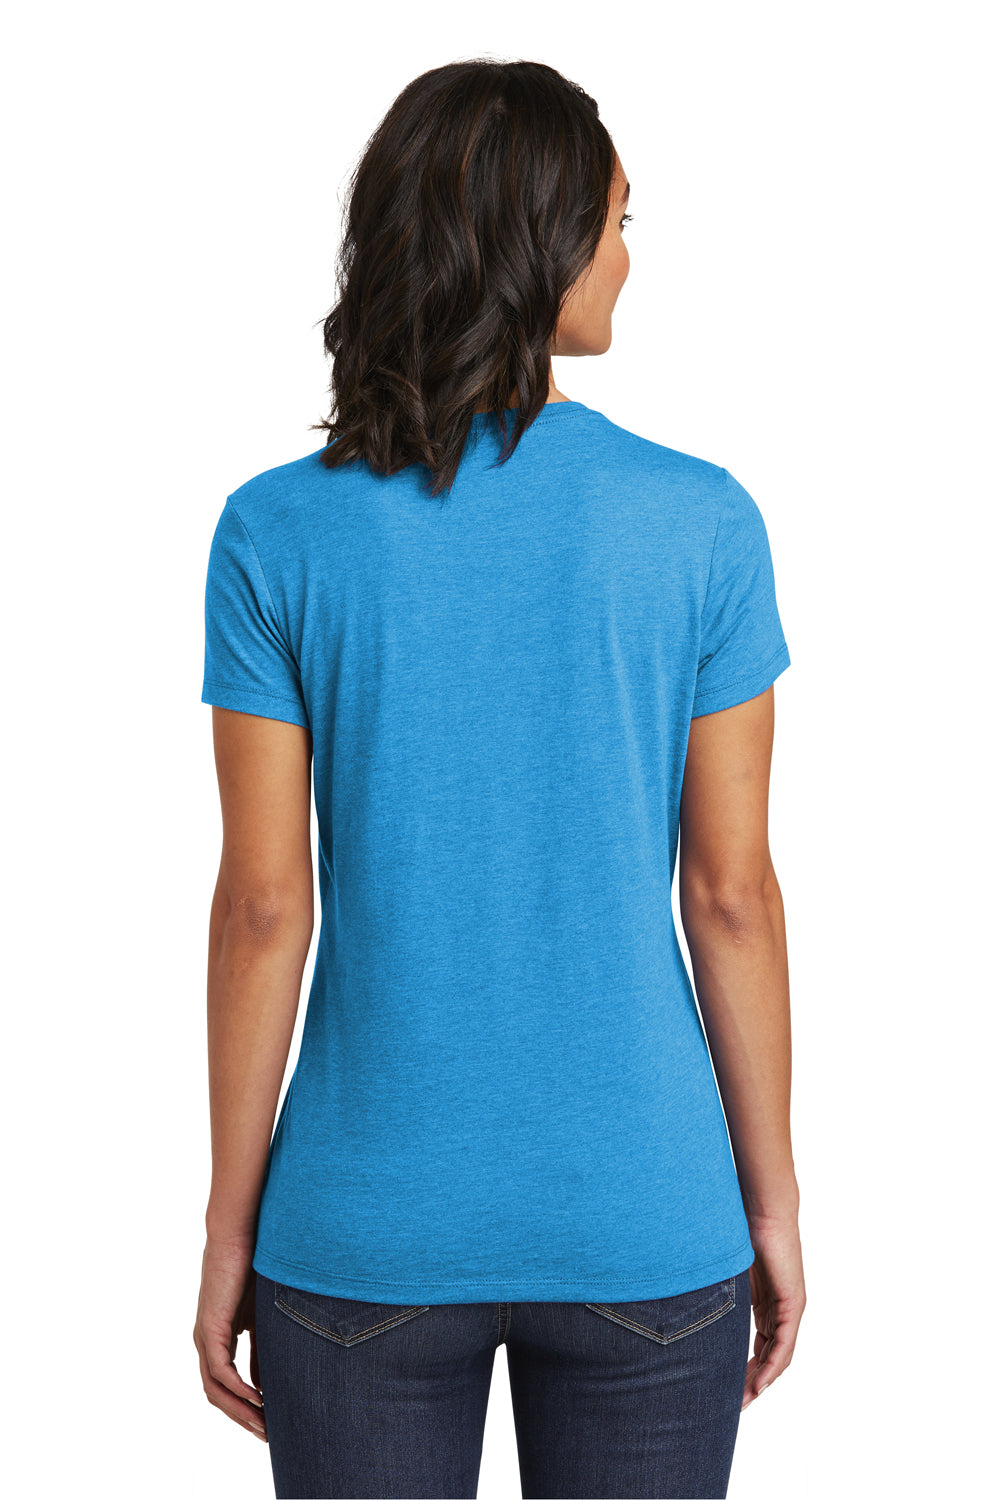 District DT6002 Womens Very Important Short Sleeve Crewneck T-Shirt Heather Turquoise Blue Back